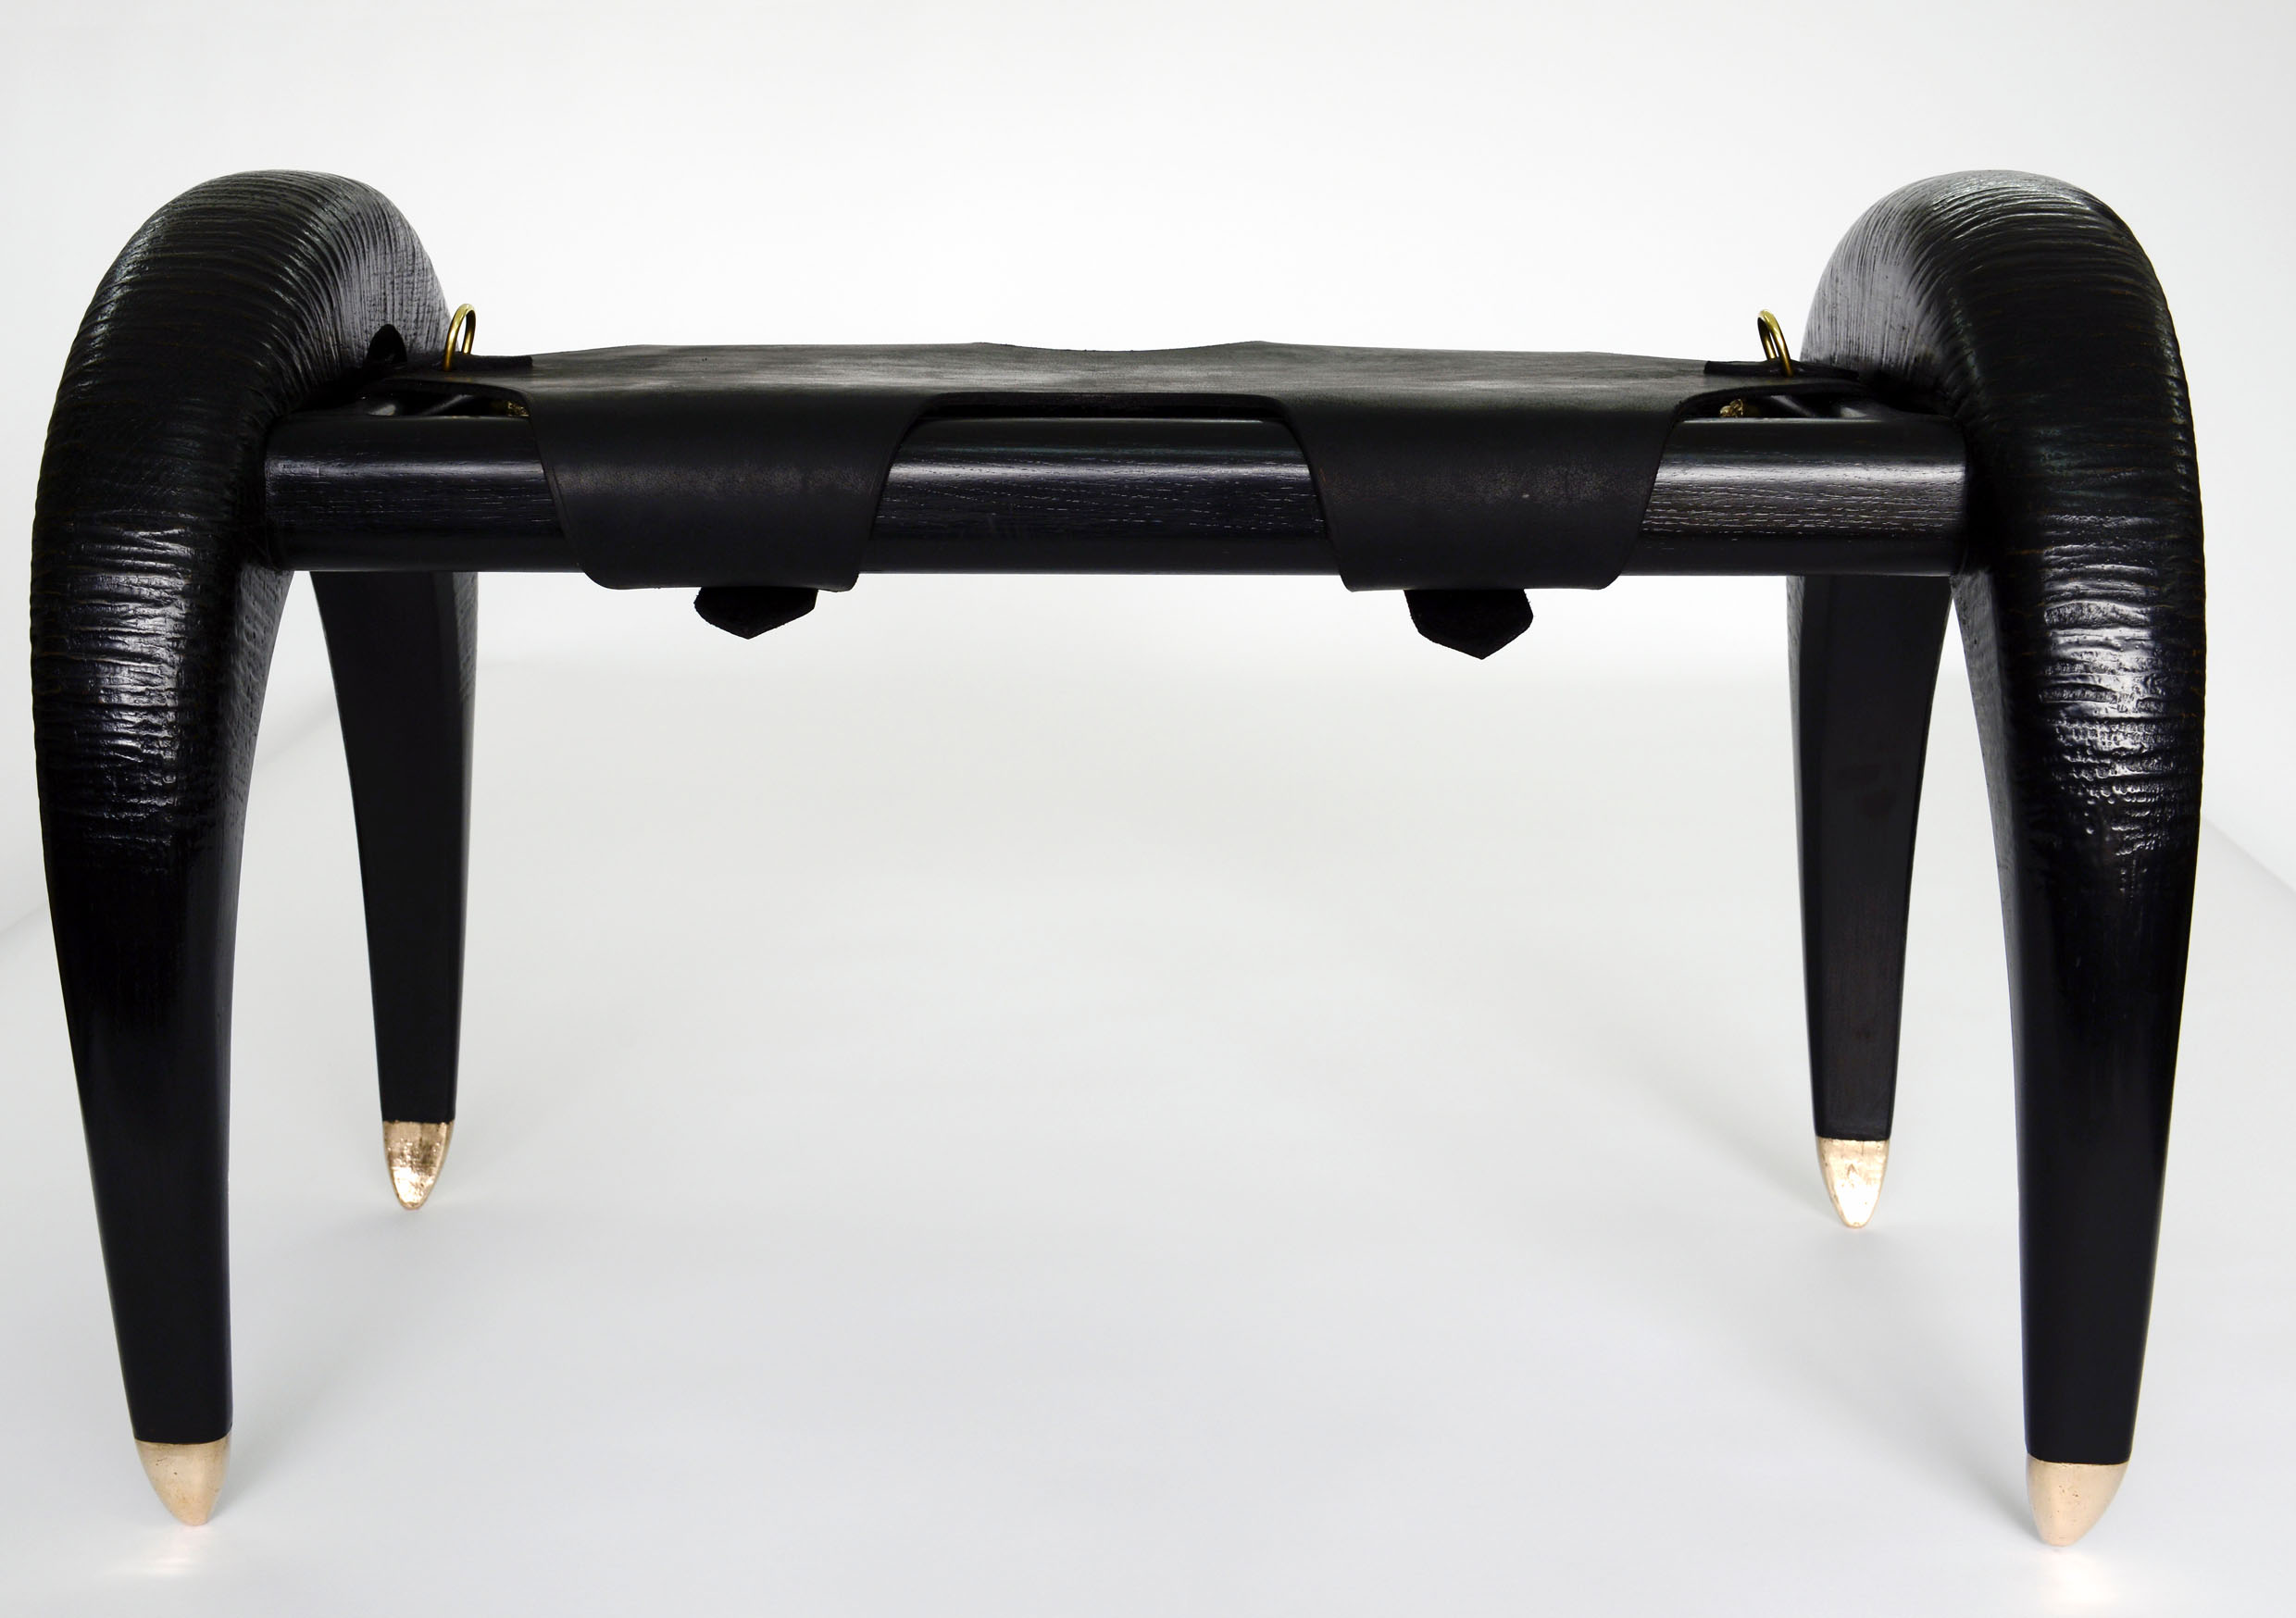 Hand carved from Oak, treated with a Black pigment based bio resin creating a moisture resilient tactile surface.  Embracing voluptuous curved legs resting on bronze stiletto tips, with four discreetly placed nipples cast form a Cornish Pixie in bronze. Erotic furniture Erotic lighting swallowandbone.com 
